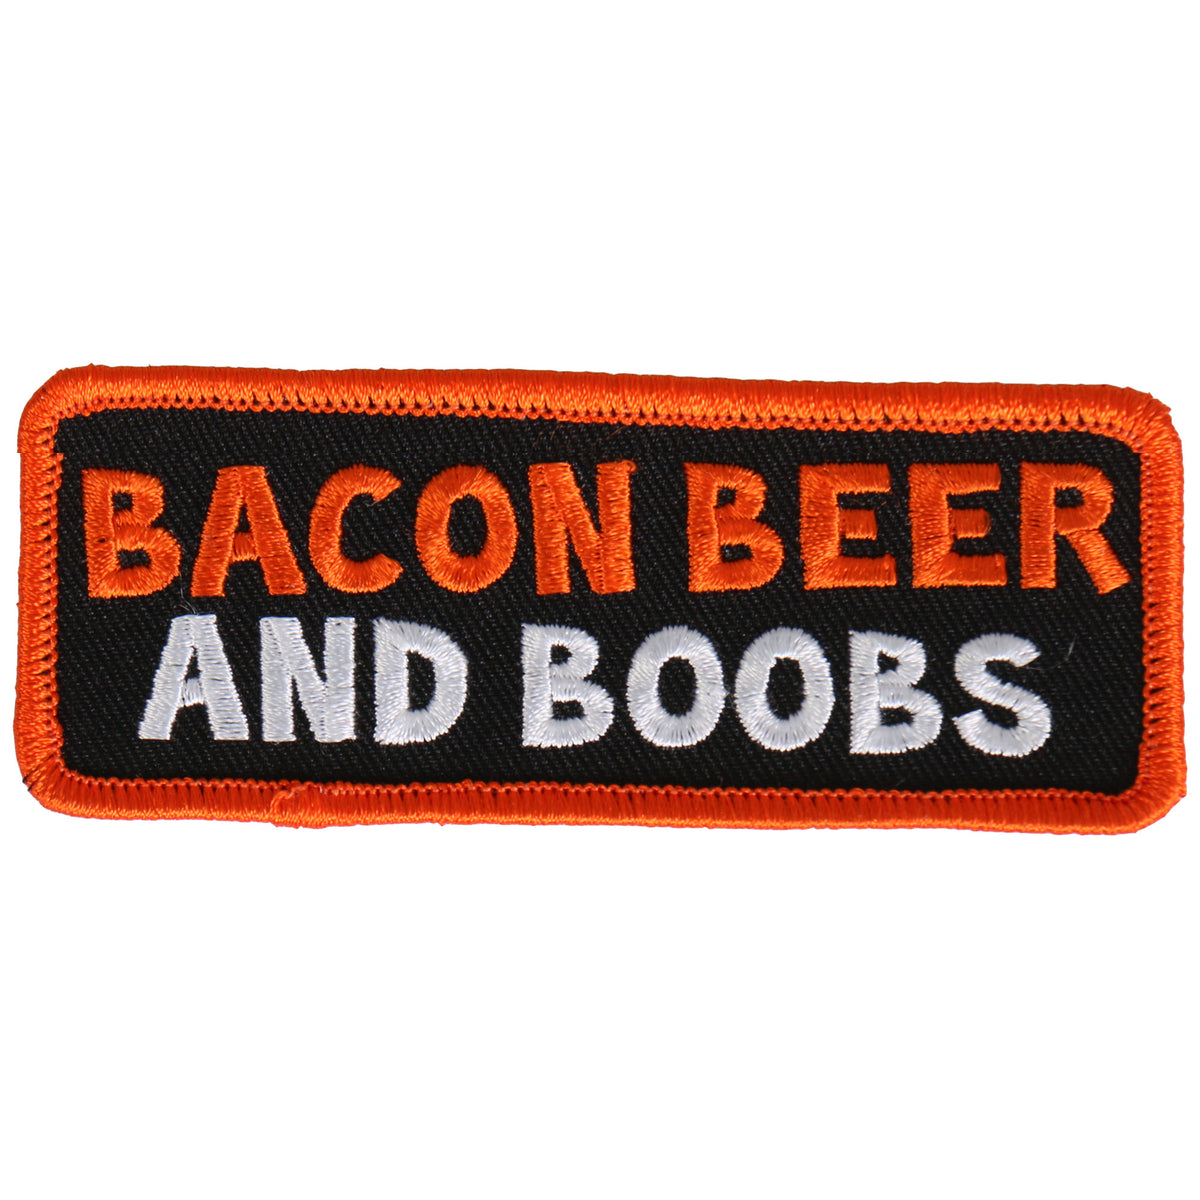 PATCH BACON BEER AND BOOBS